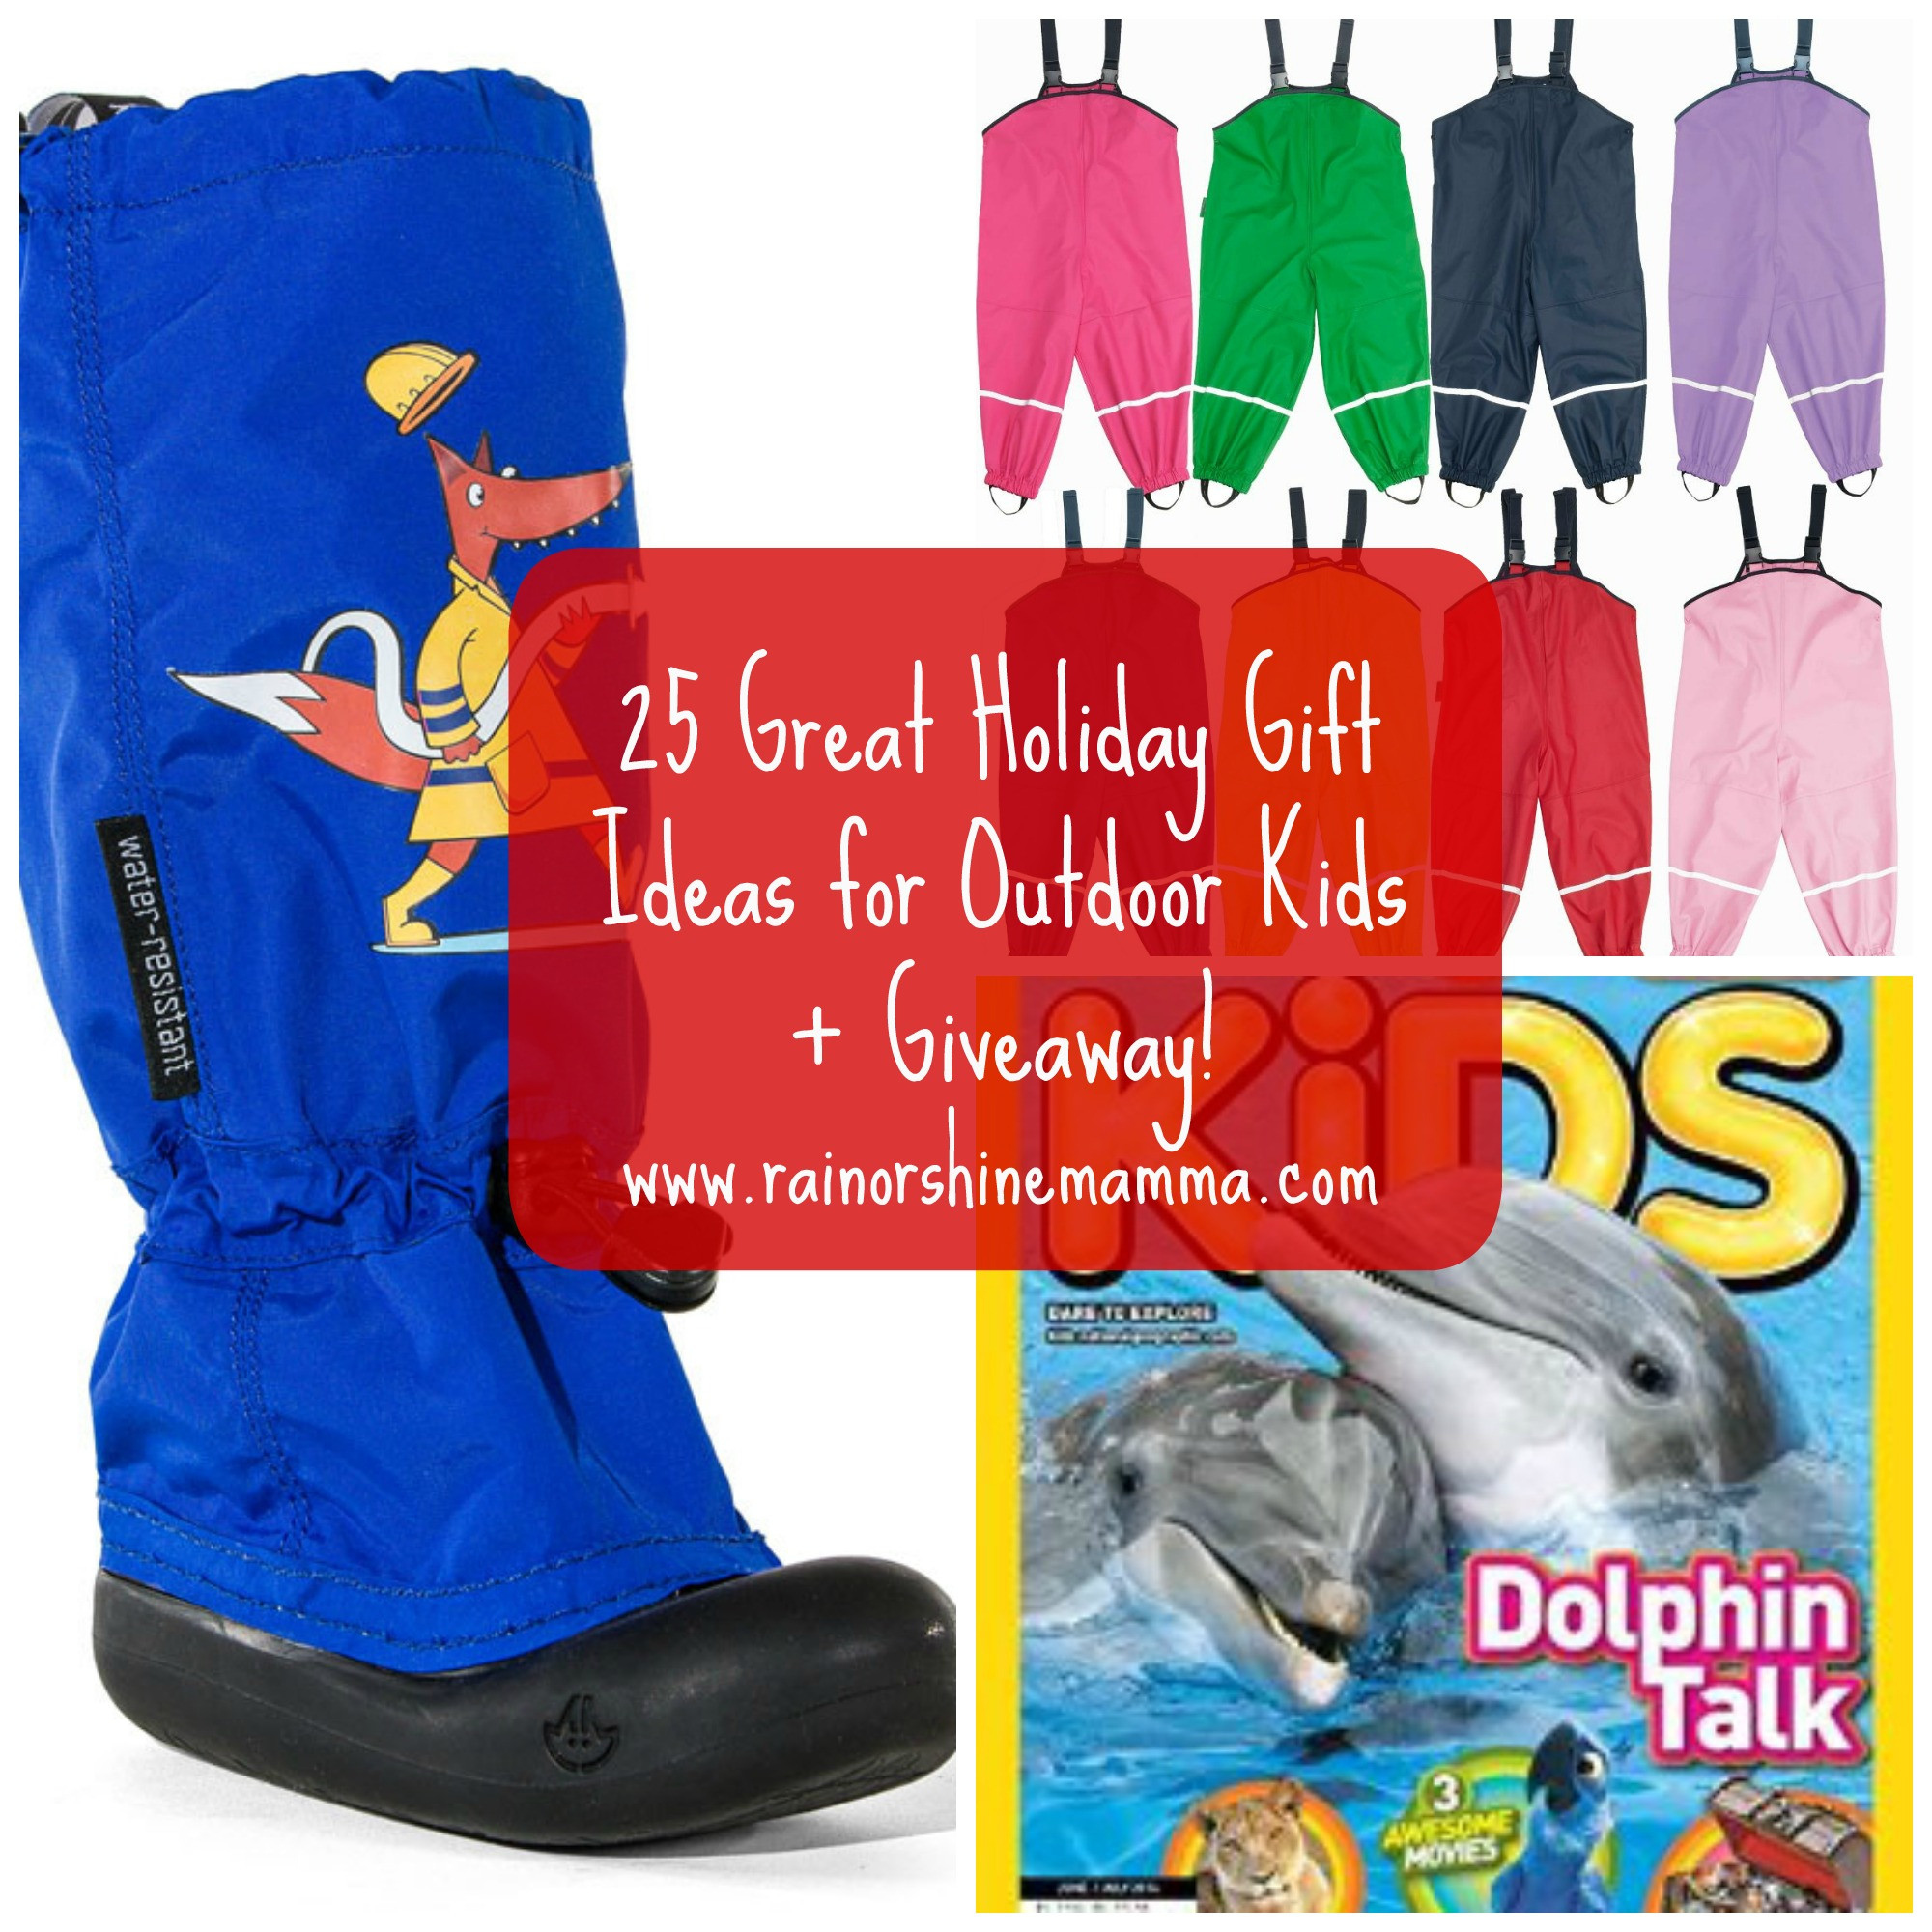 Outdoor Gifts For Kids
 25 Great Holiday Gift Ideas for Outdoor Kids Rain or